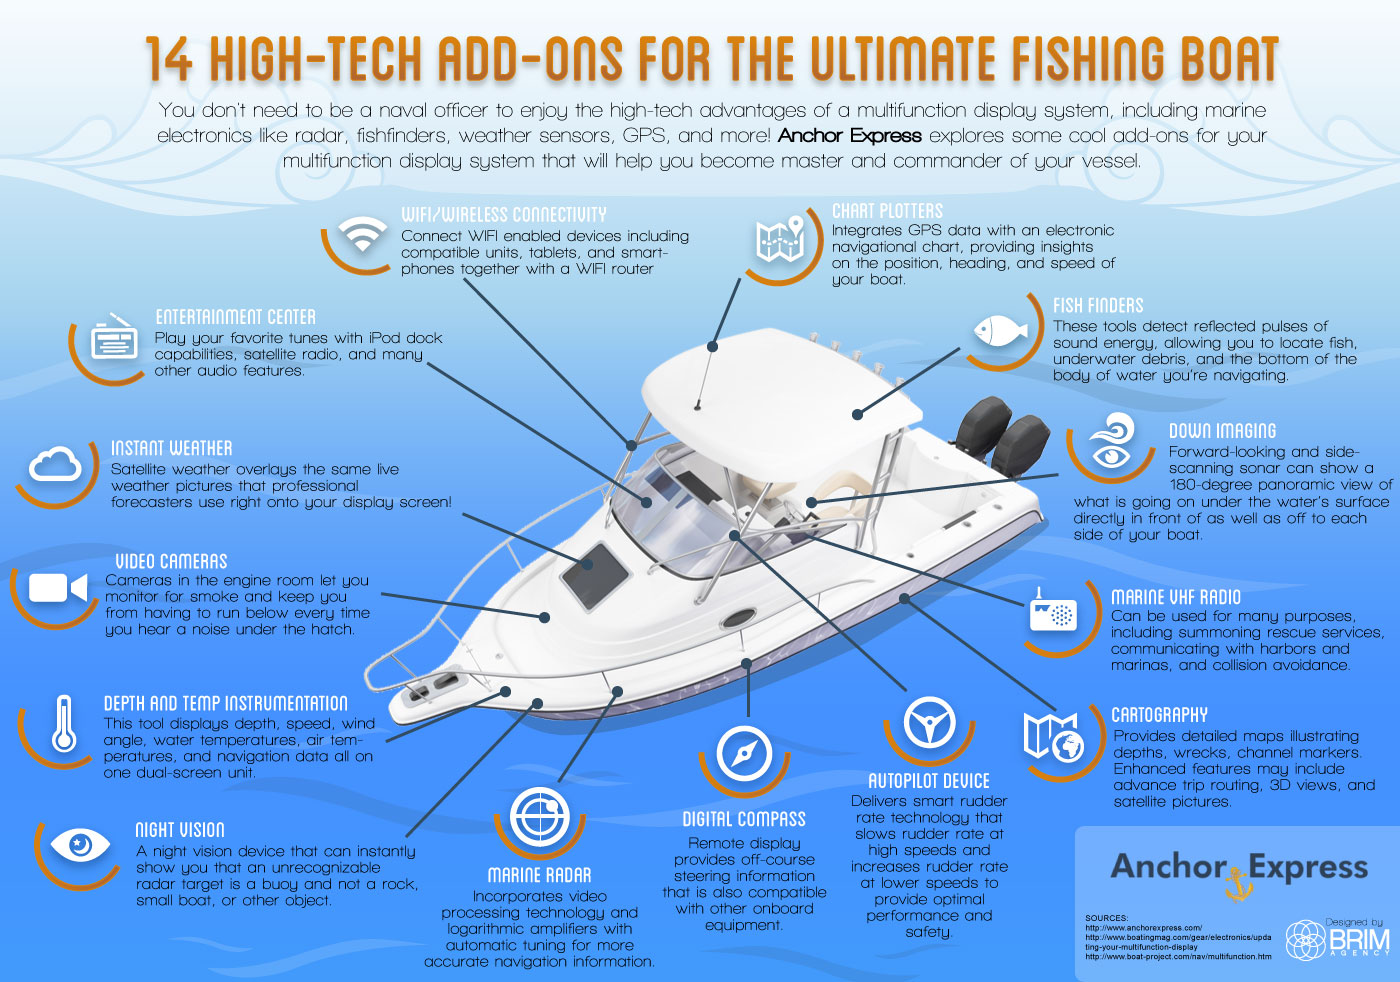 14 High-Tech Add-Ons for the Ultimate Fishing Boat